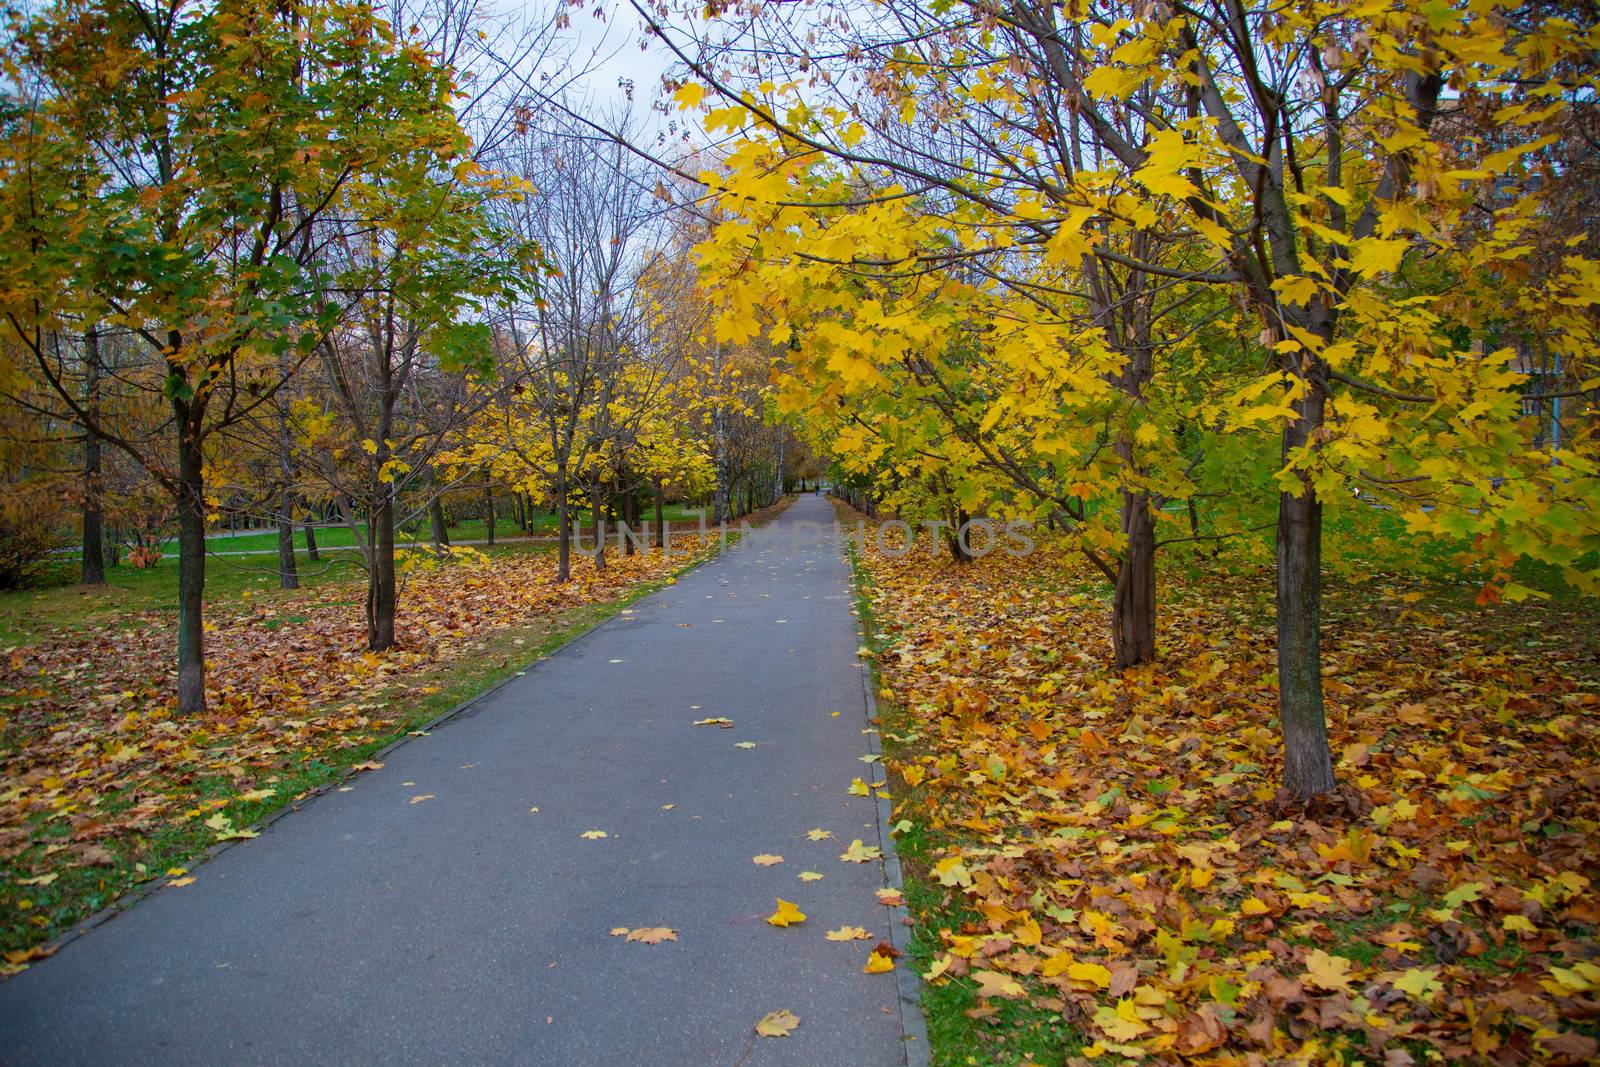 Road in the park in autumn amid fallen leaves by L86